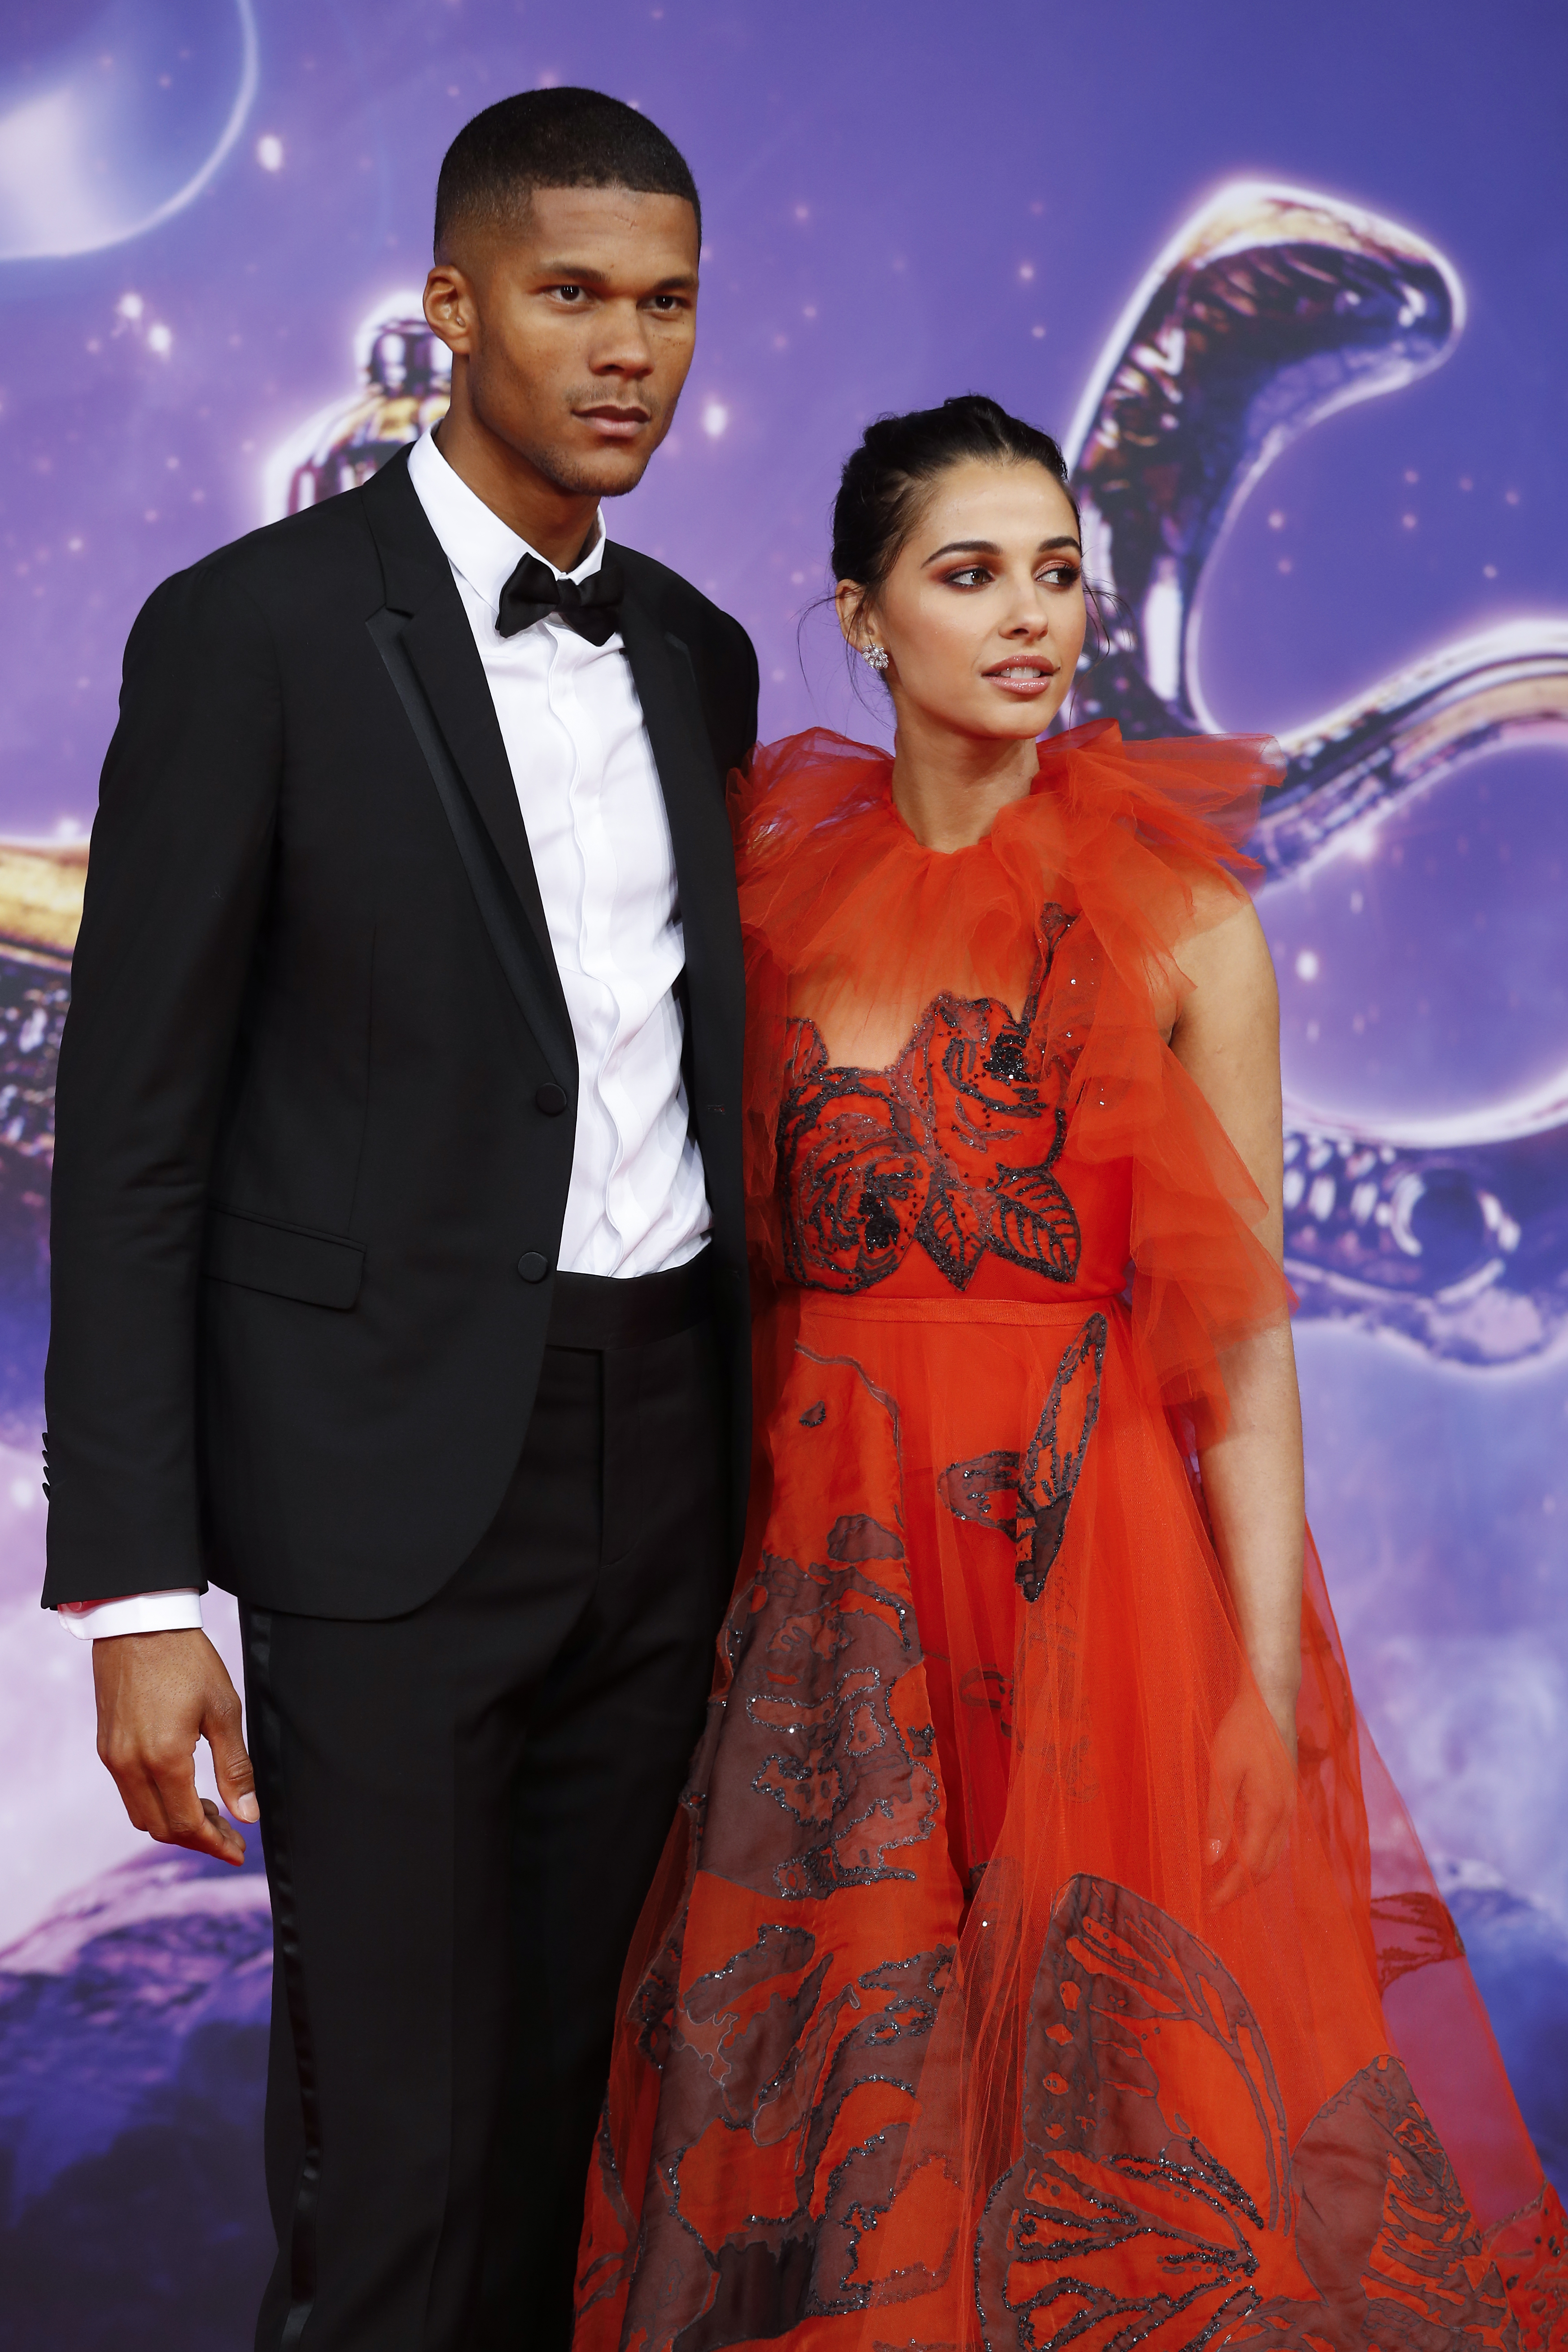 Jordan Spence and Naomi Scott are pictured at the movie premiere of "Aladdin" at UCI Luxe Mercedes Platz on May 8, 2019, in Berlin, Germany | Source: Getty Imges